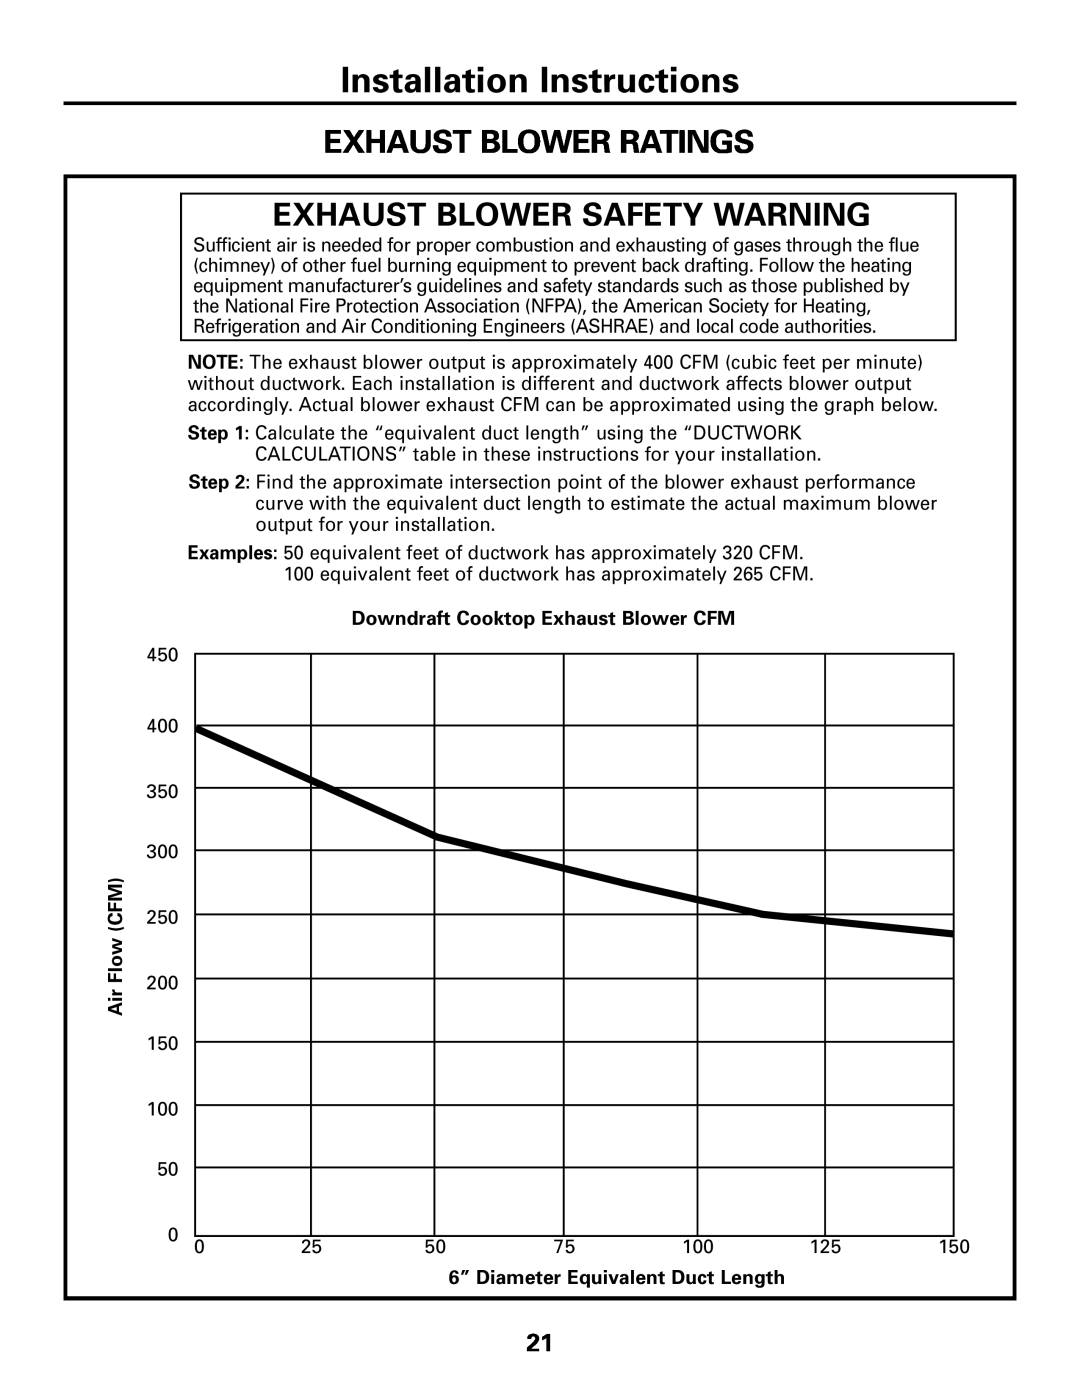 GE JGP989 manual Exhaust Blower Ratings, Exhaust Blower Safety Warning, Installation Instructions, Flow CFM 